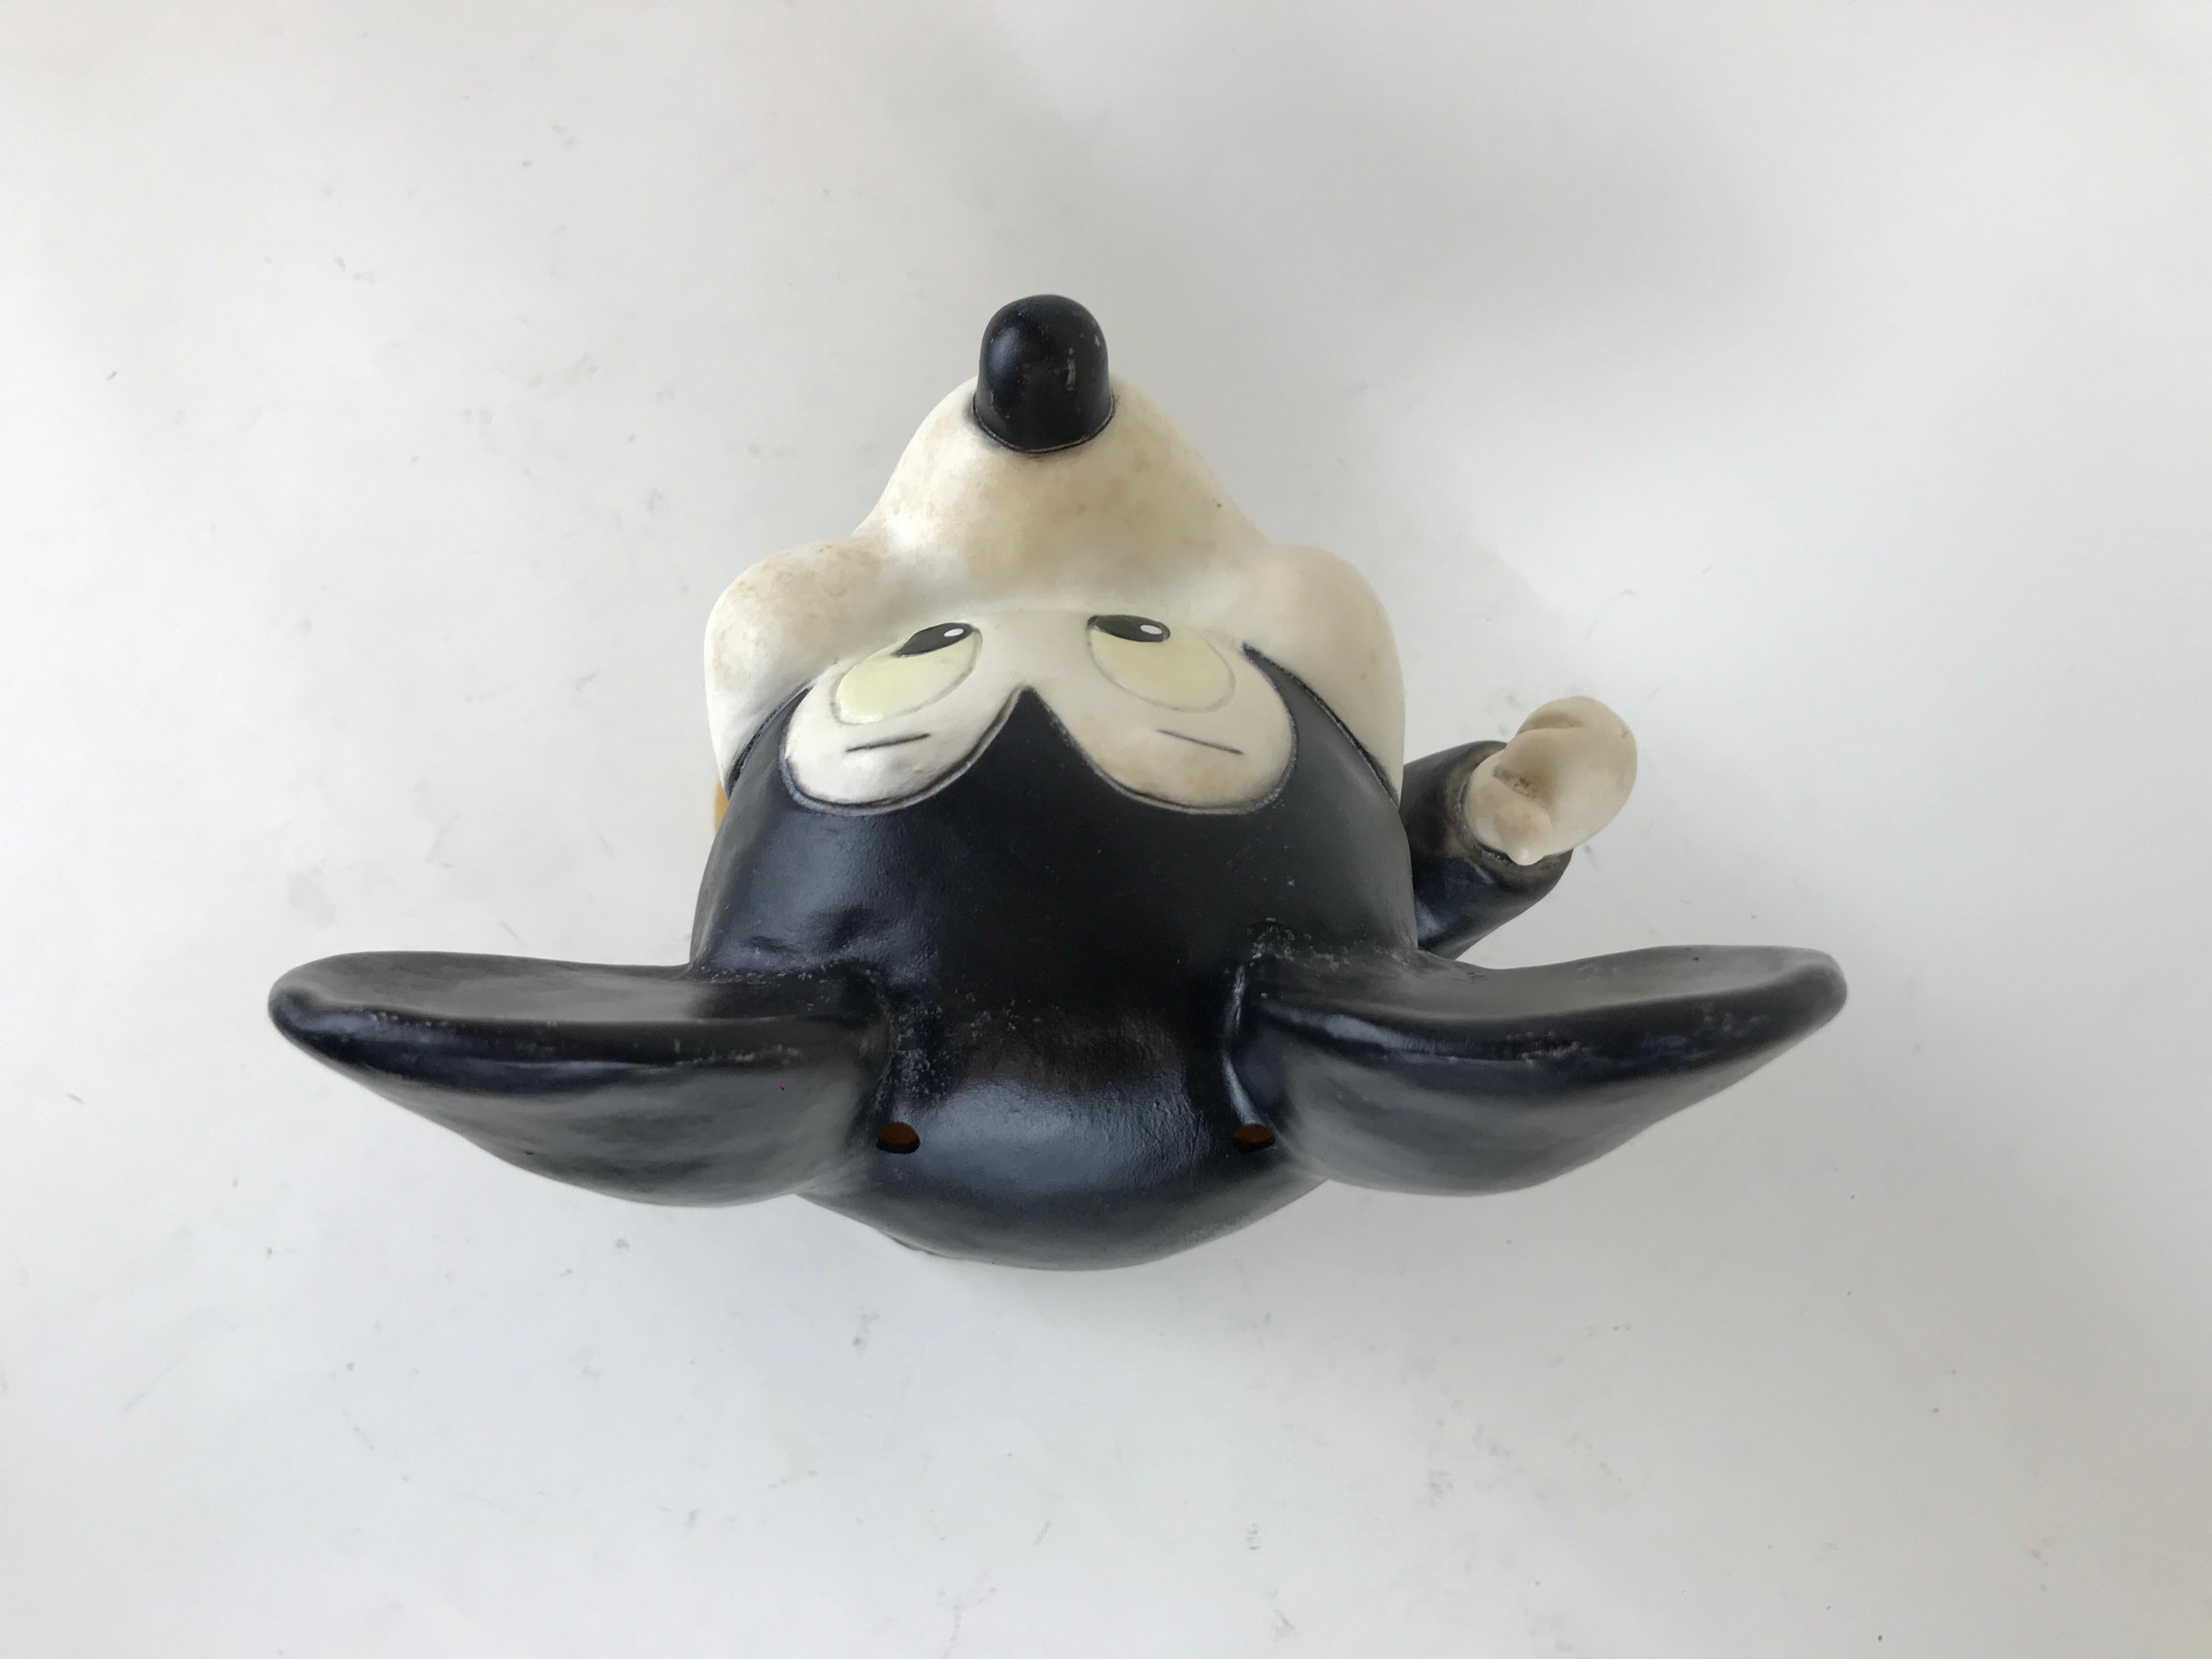 1980s Vintage Disney Mickey Mouse Plastic Nightlight by Heico Made in Germany 3